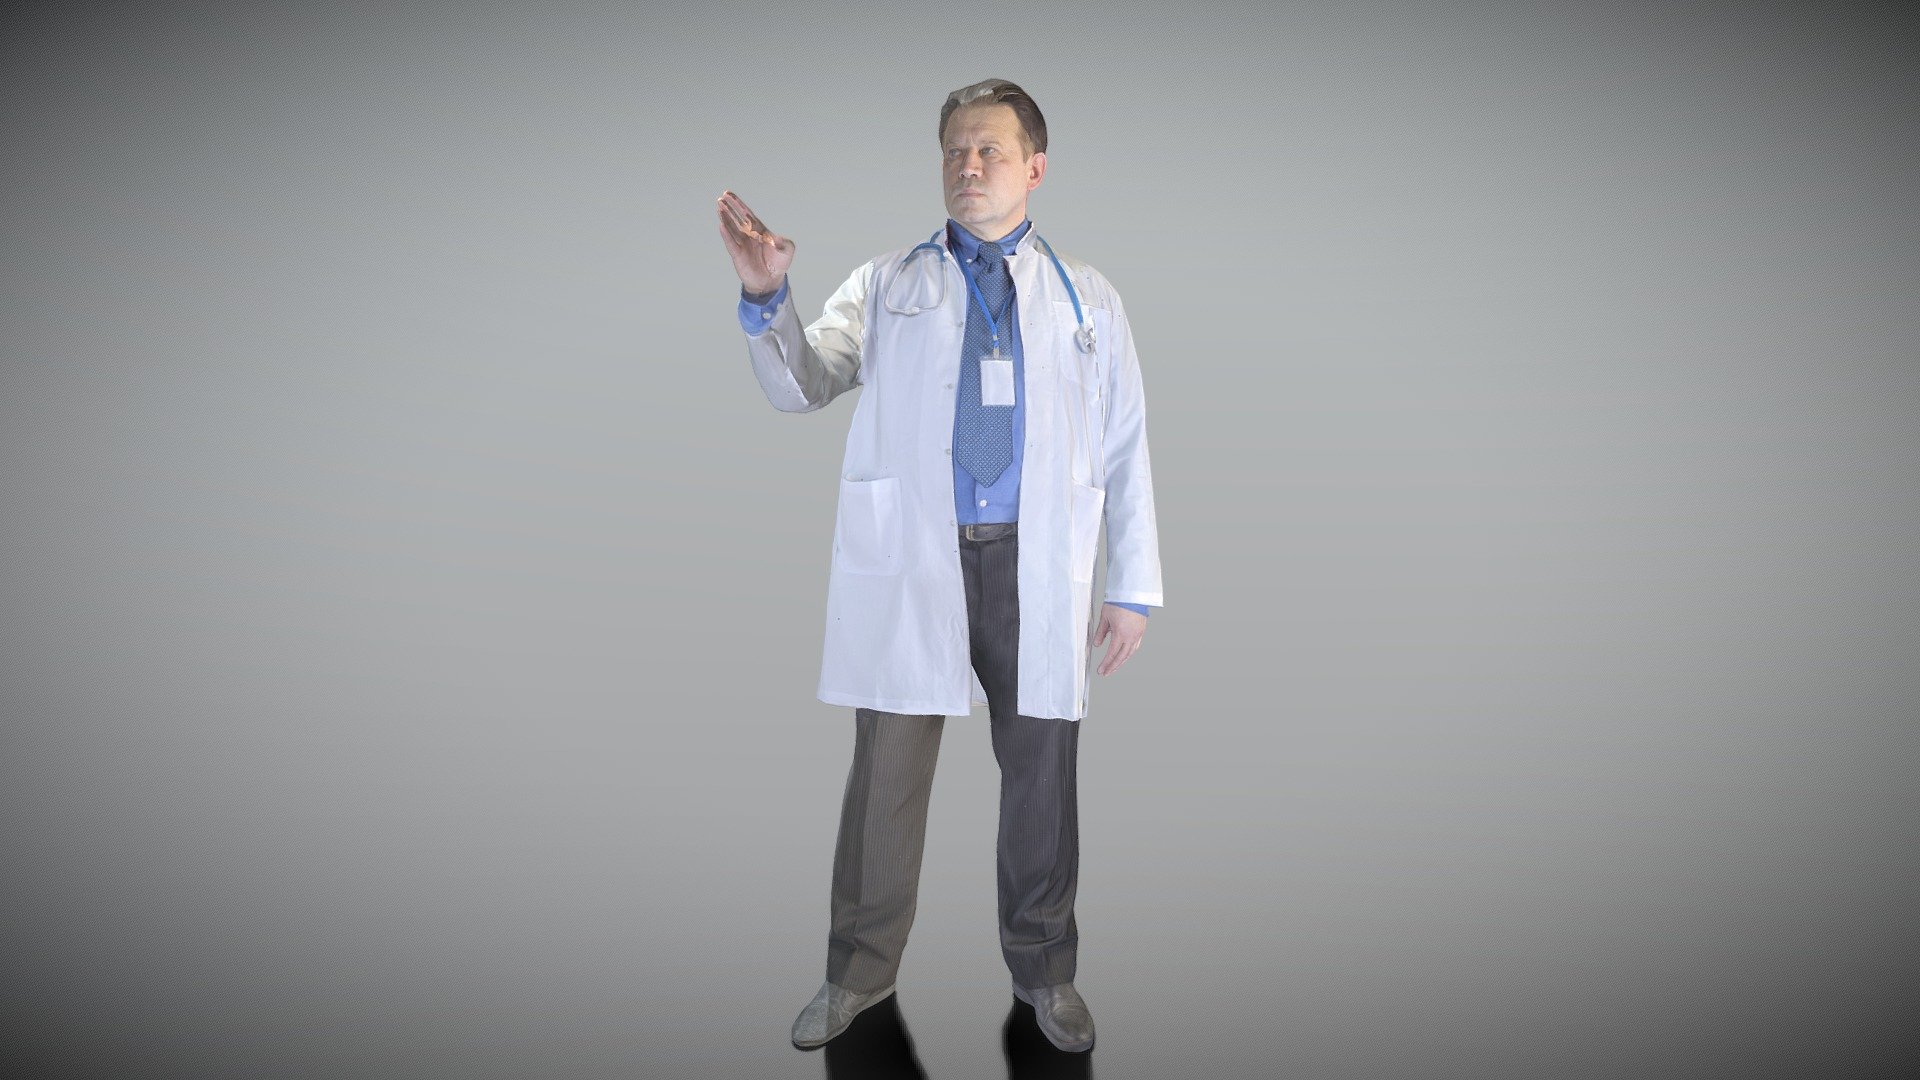 This is a true human size and detailed model of an adult man of Caucasian appearance dressed in a surgical uniform. The model is captured in typical professional pose to perfectly match a variety of architectural and product visualizations, be used as a background or mid-sized character in advert banners, professional products/devices presentations, educational tutorials, etc.

Technical characteristics:




digital double 3d scan model

decimated model (100k triangles)

sufficiently clean

PBR textures: Diffuse, Normal, Specular maps

non-overlapping UV map

Download package includes Cinema 4D project file with Redshift shader, OBJ, FBX files, which are applicable for 3ds Max, Maya, Unreal Engine, Unity, Blender, etc. All the textures included into the main archive.

BONUSE: in this package you will also get a high-poly (.ztl tool) clean and retopologized automatically via ZRemesher 3d model in zBrush, thus youll be able to make your own editing of the purchased 3d model.

3D EVERYTHING - Male medical doctor showing something 352 - Buy Royalty Free 3D model by deep3dstudio 3d model